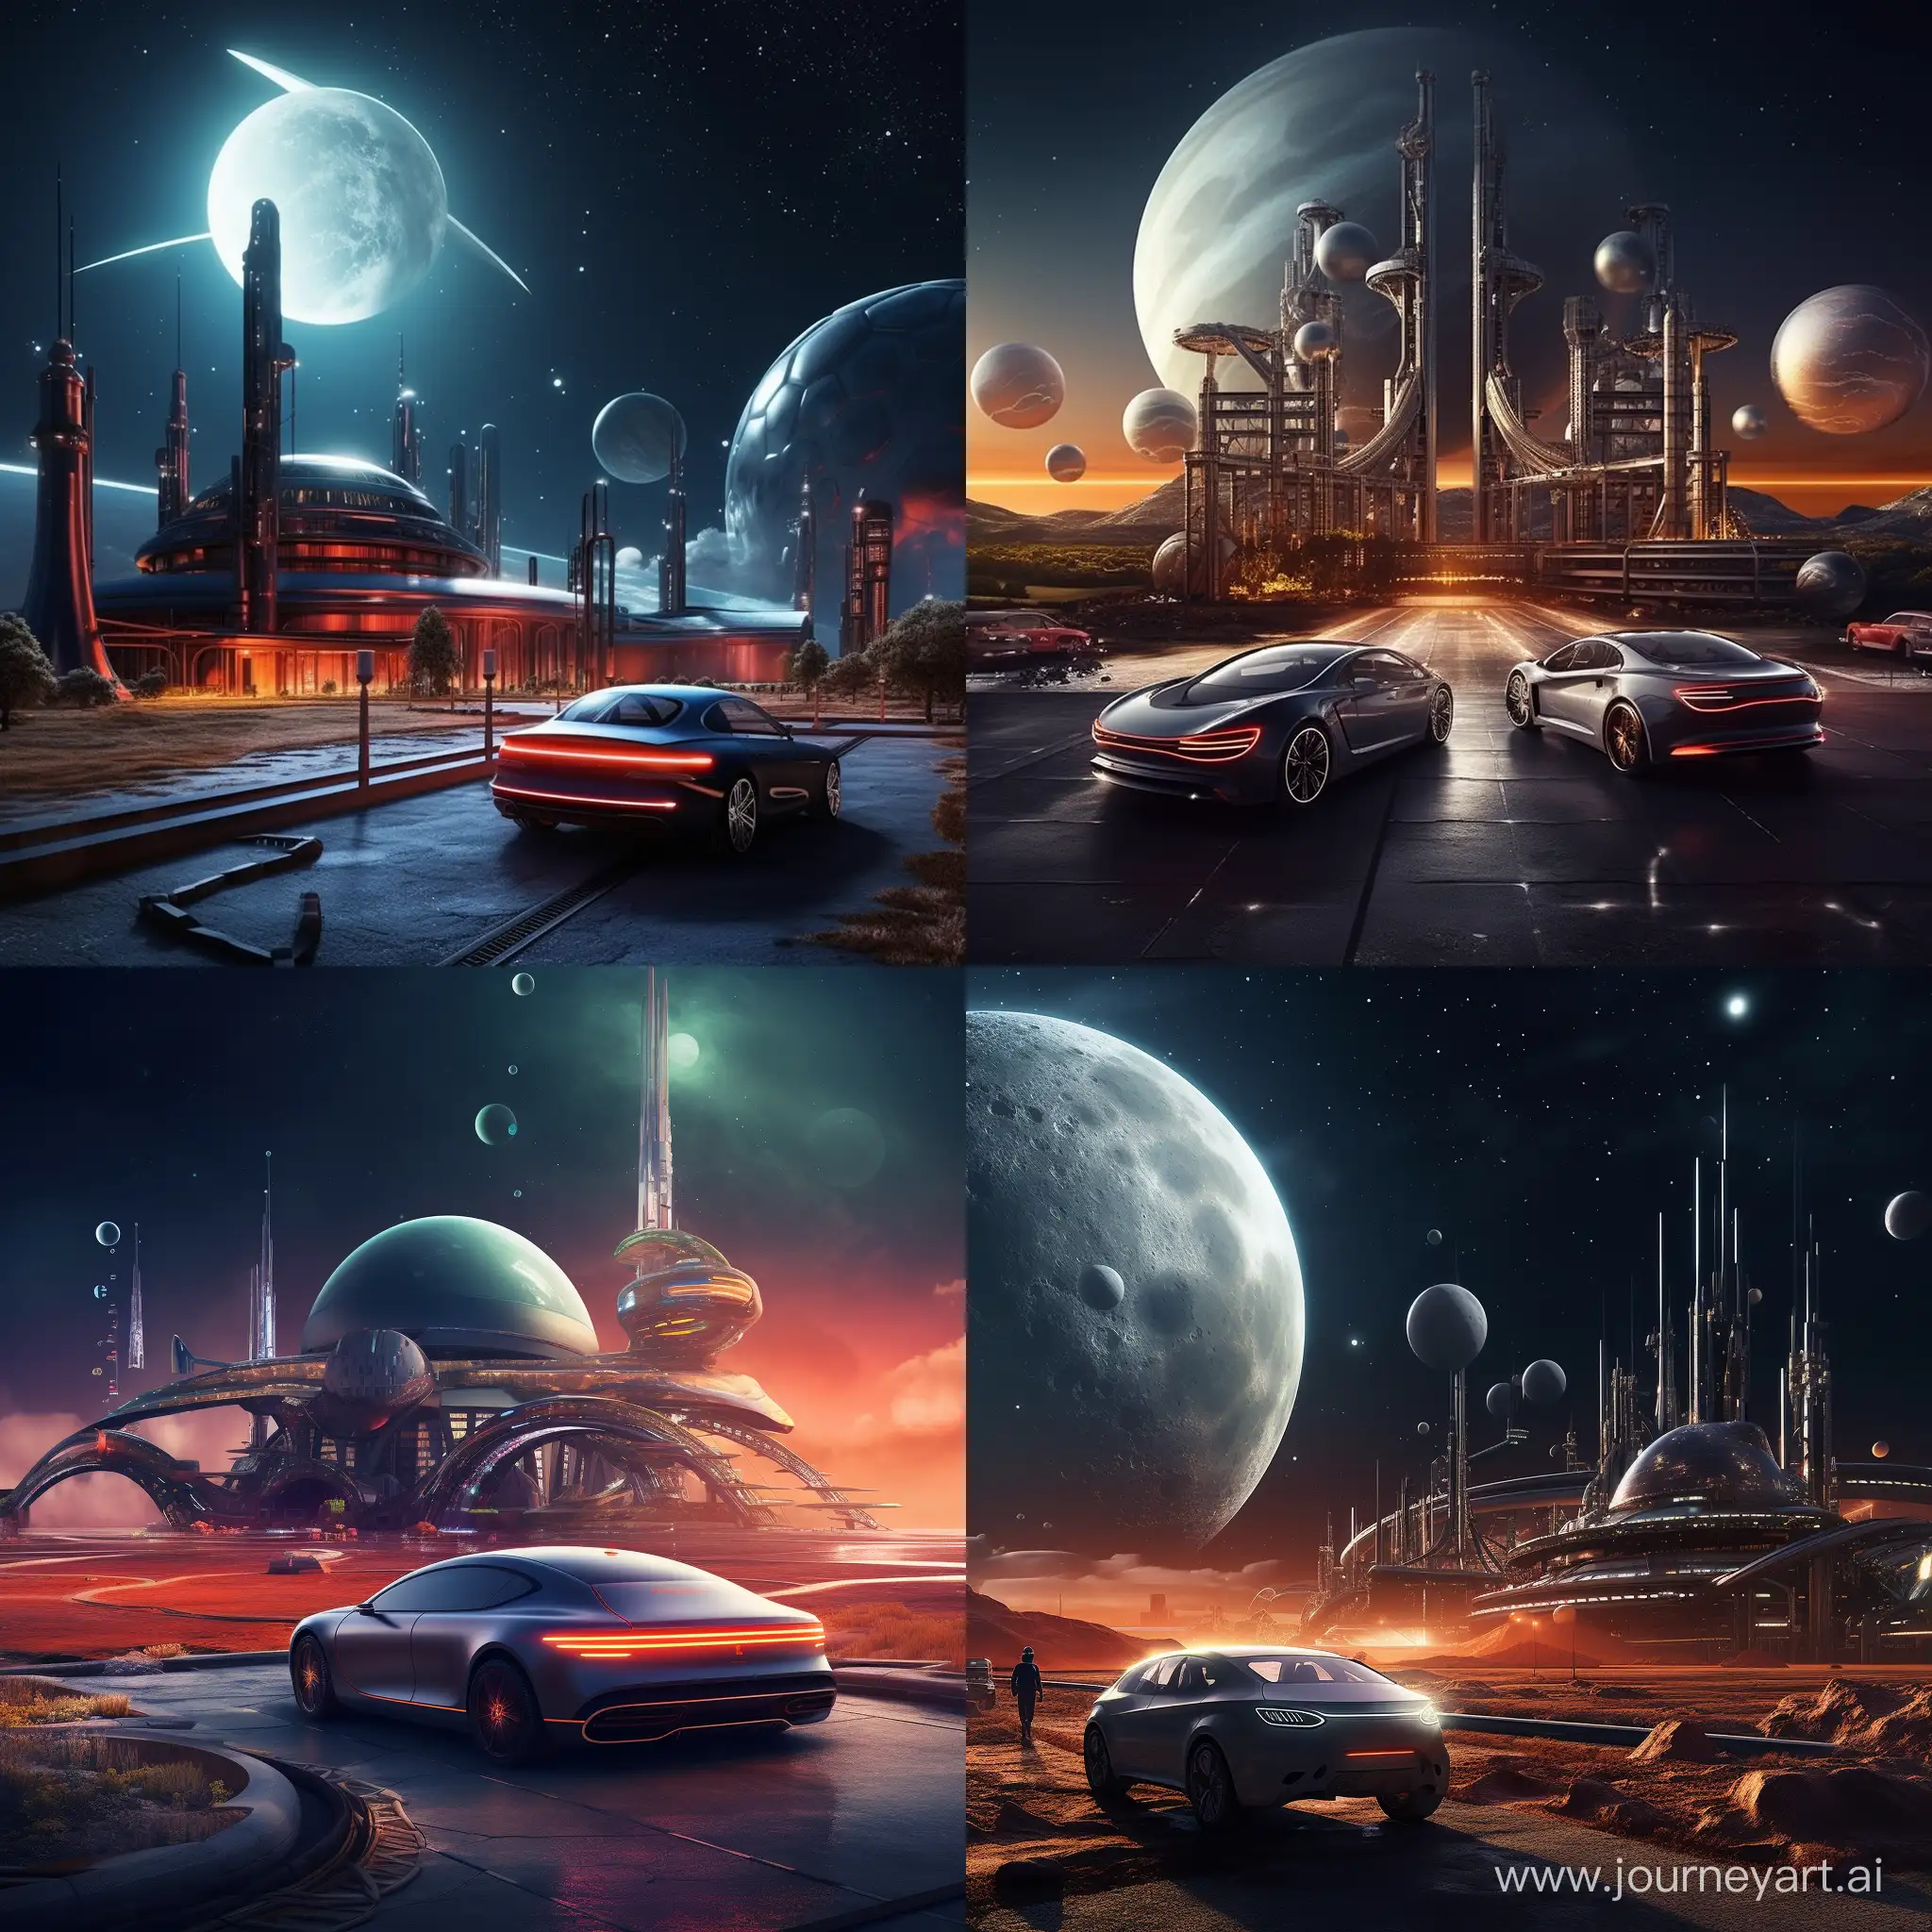 Futuristic-Car-Manufacturing-Facility-under-Dual-Moons-and-a-Setting-Star